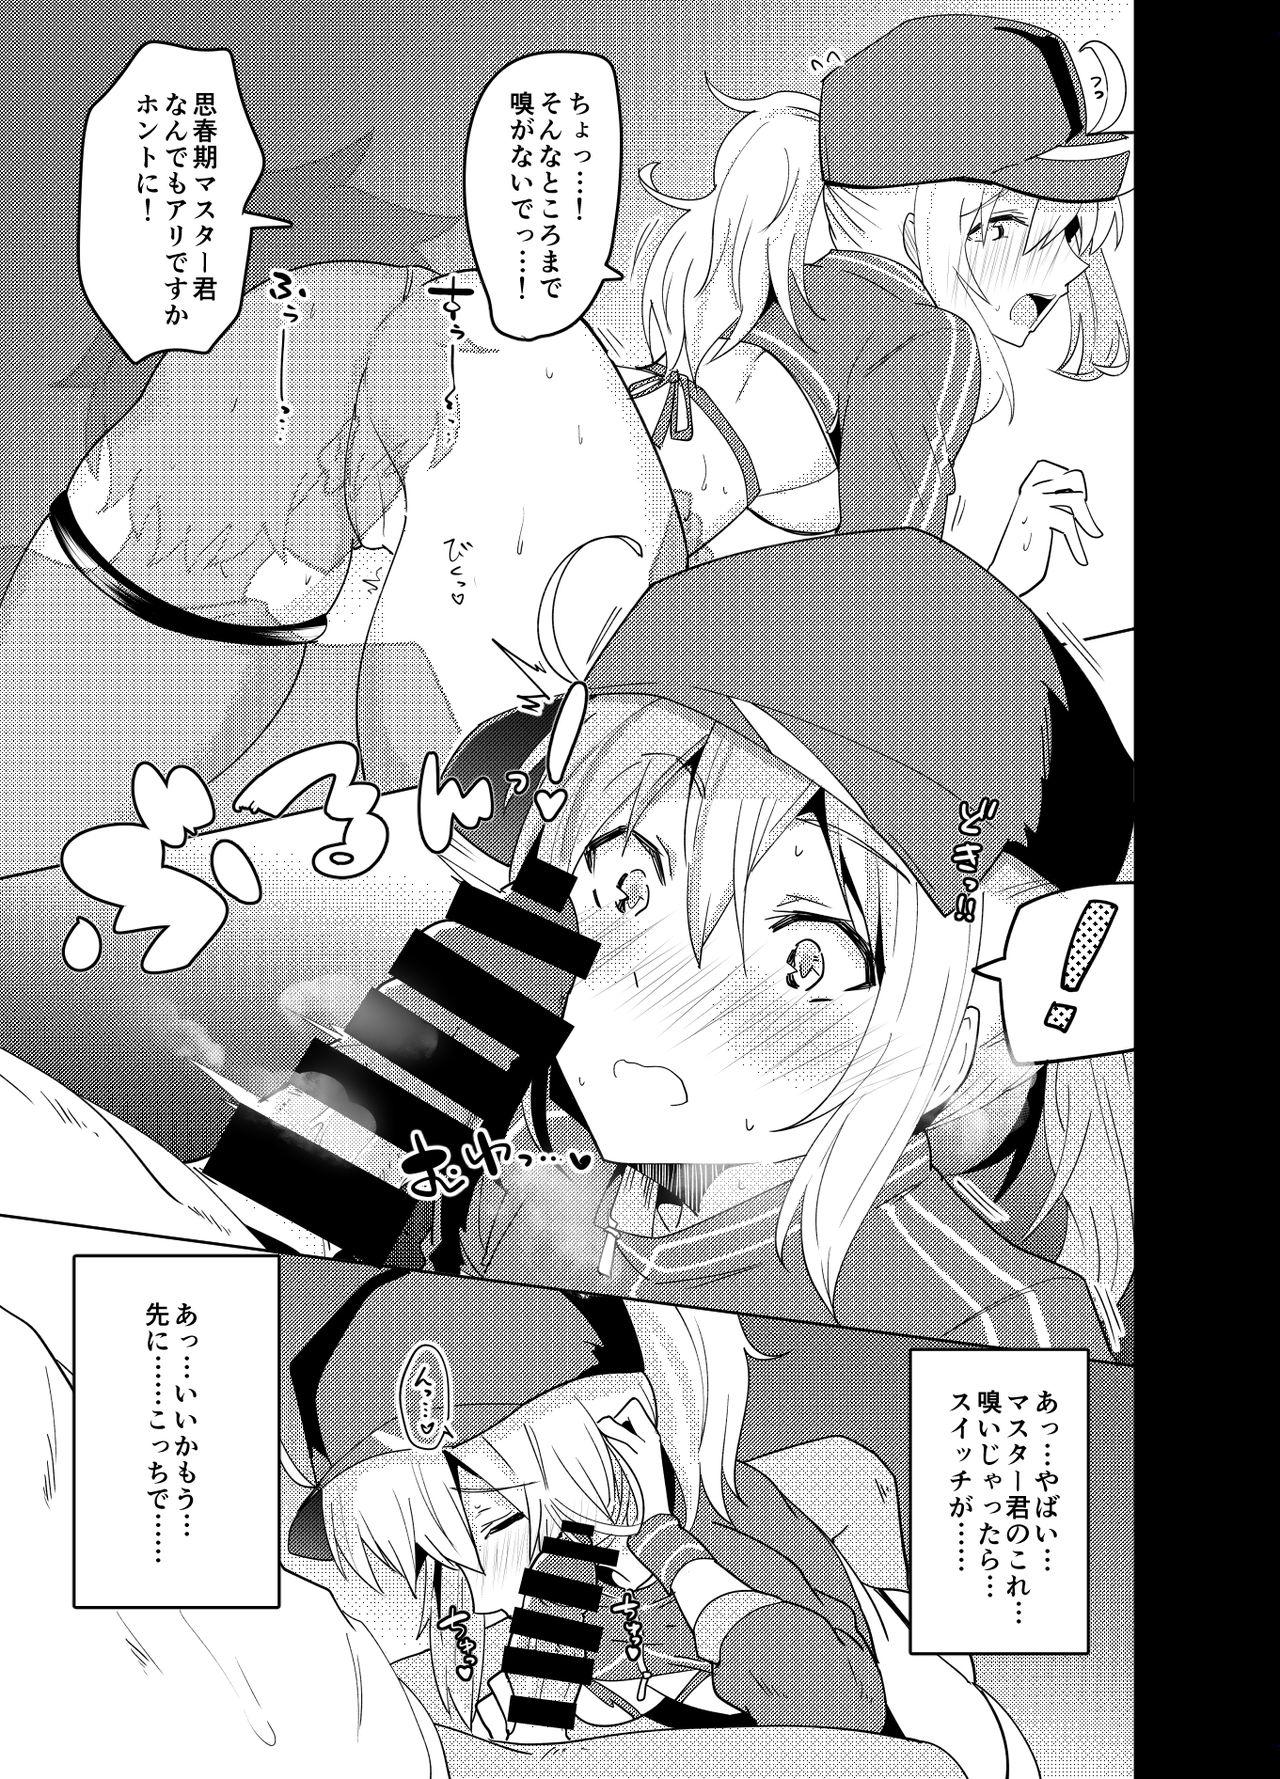 Climax Dosukebe Saber Wars 3 - Fate grand order Boys - Page 9